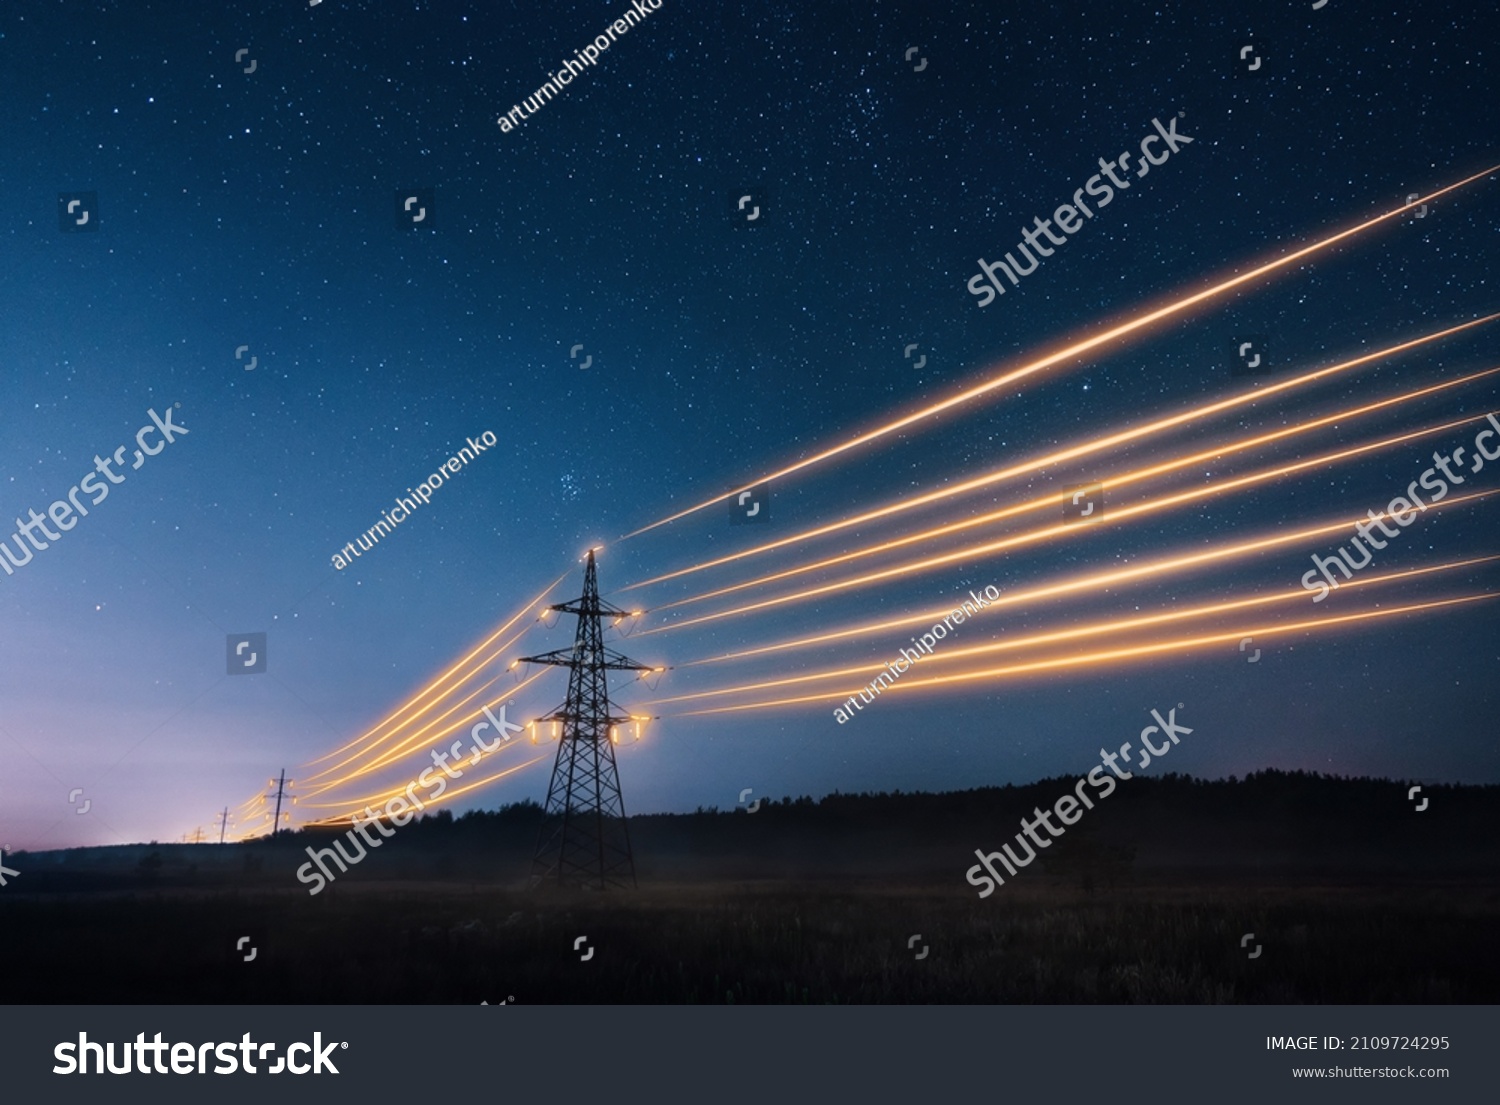 Electricity transmission towers with orange glowing wires the starry night sky. Energy infrastructure concept. #2109724295